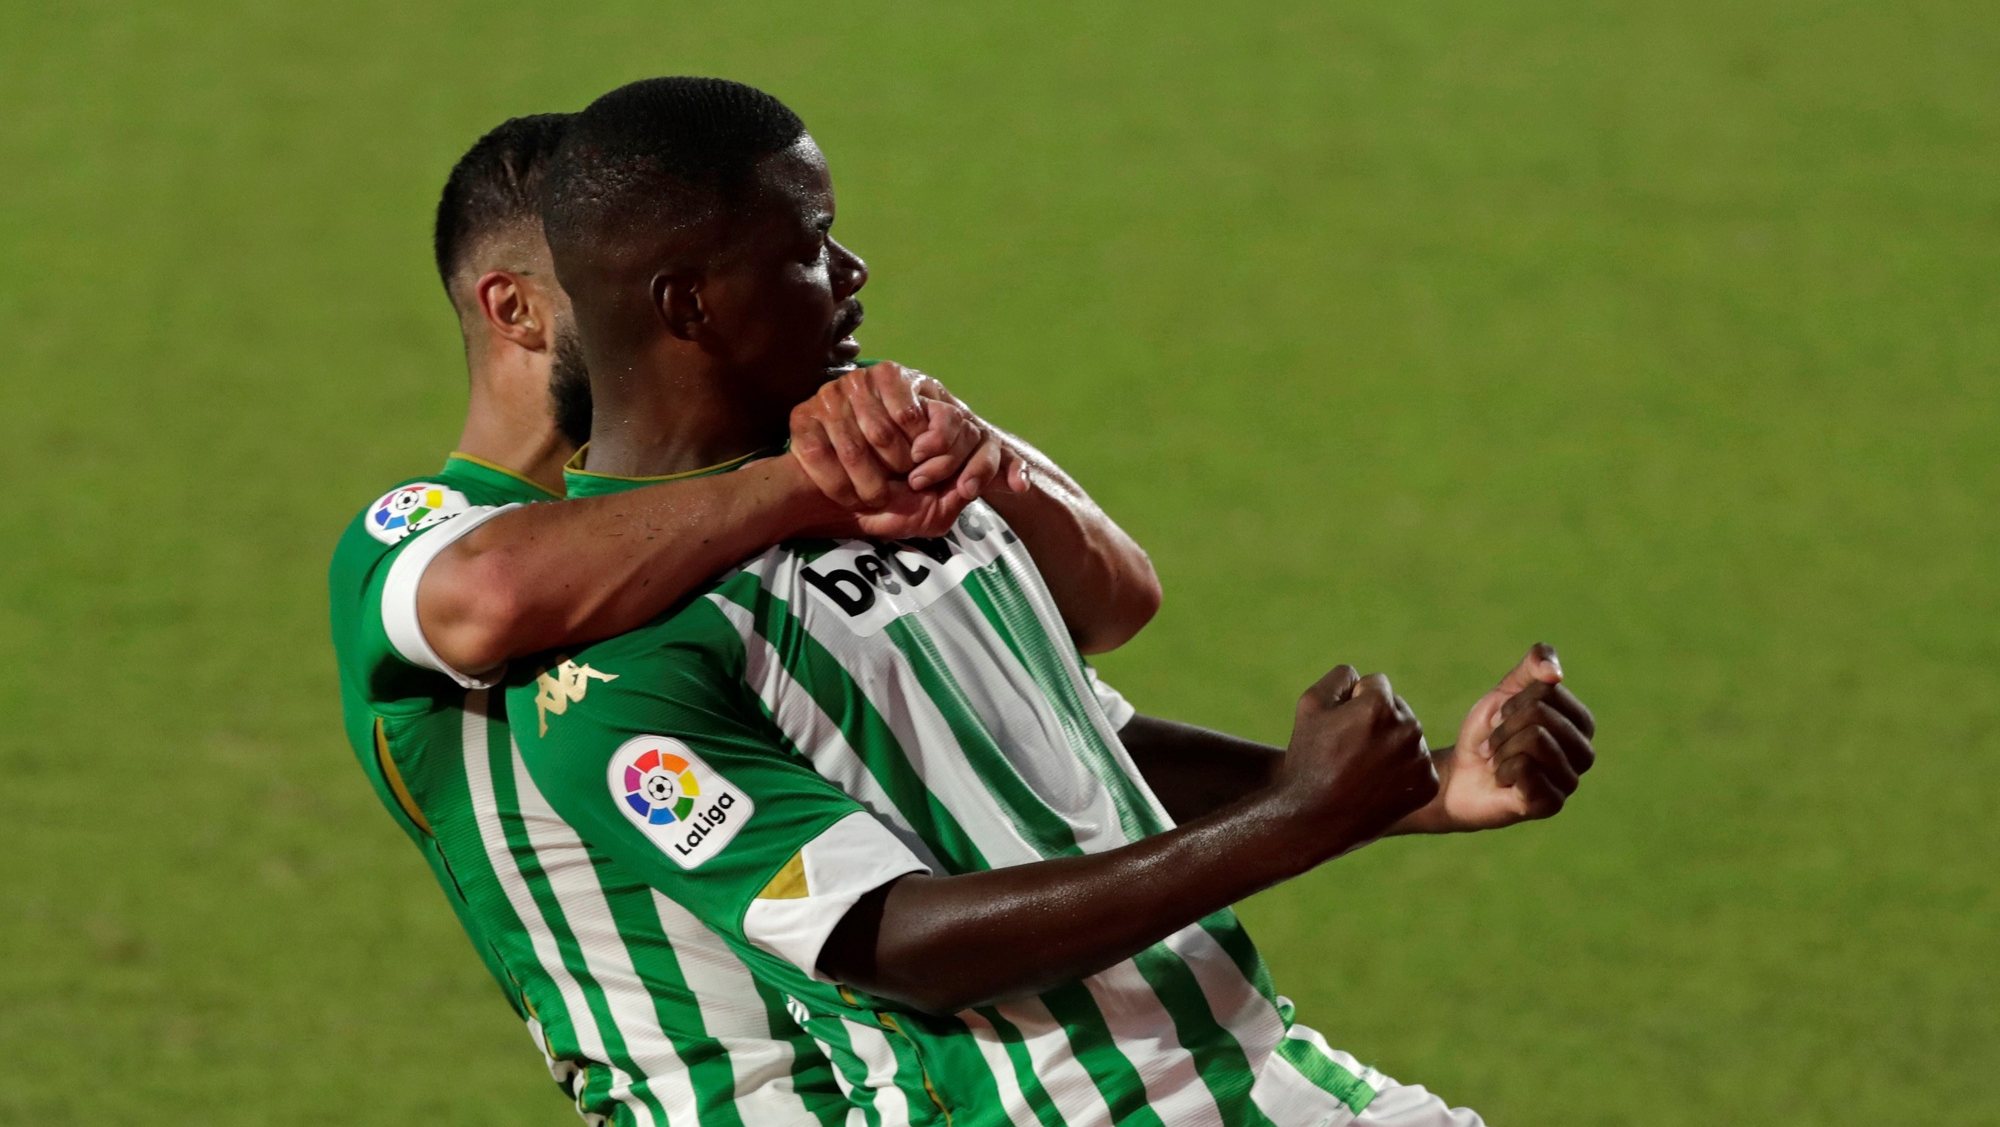 epa08699841 Betis&#039; midfielder William Carvalho (R) celebrates with teammate Nabil Fekir (L) after scoring the 2-1 goal during the Spanish LaLiga soccer match between Real Betis and Real Madrid held at Benito Villamarin Stadium in Seville, Spain, 26 September 2020.  EPA/JULIO MUNOZ